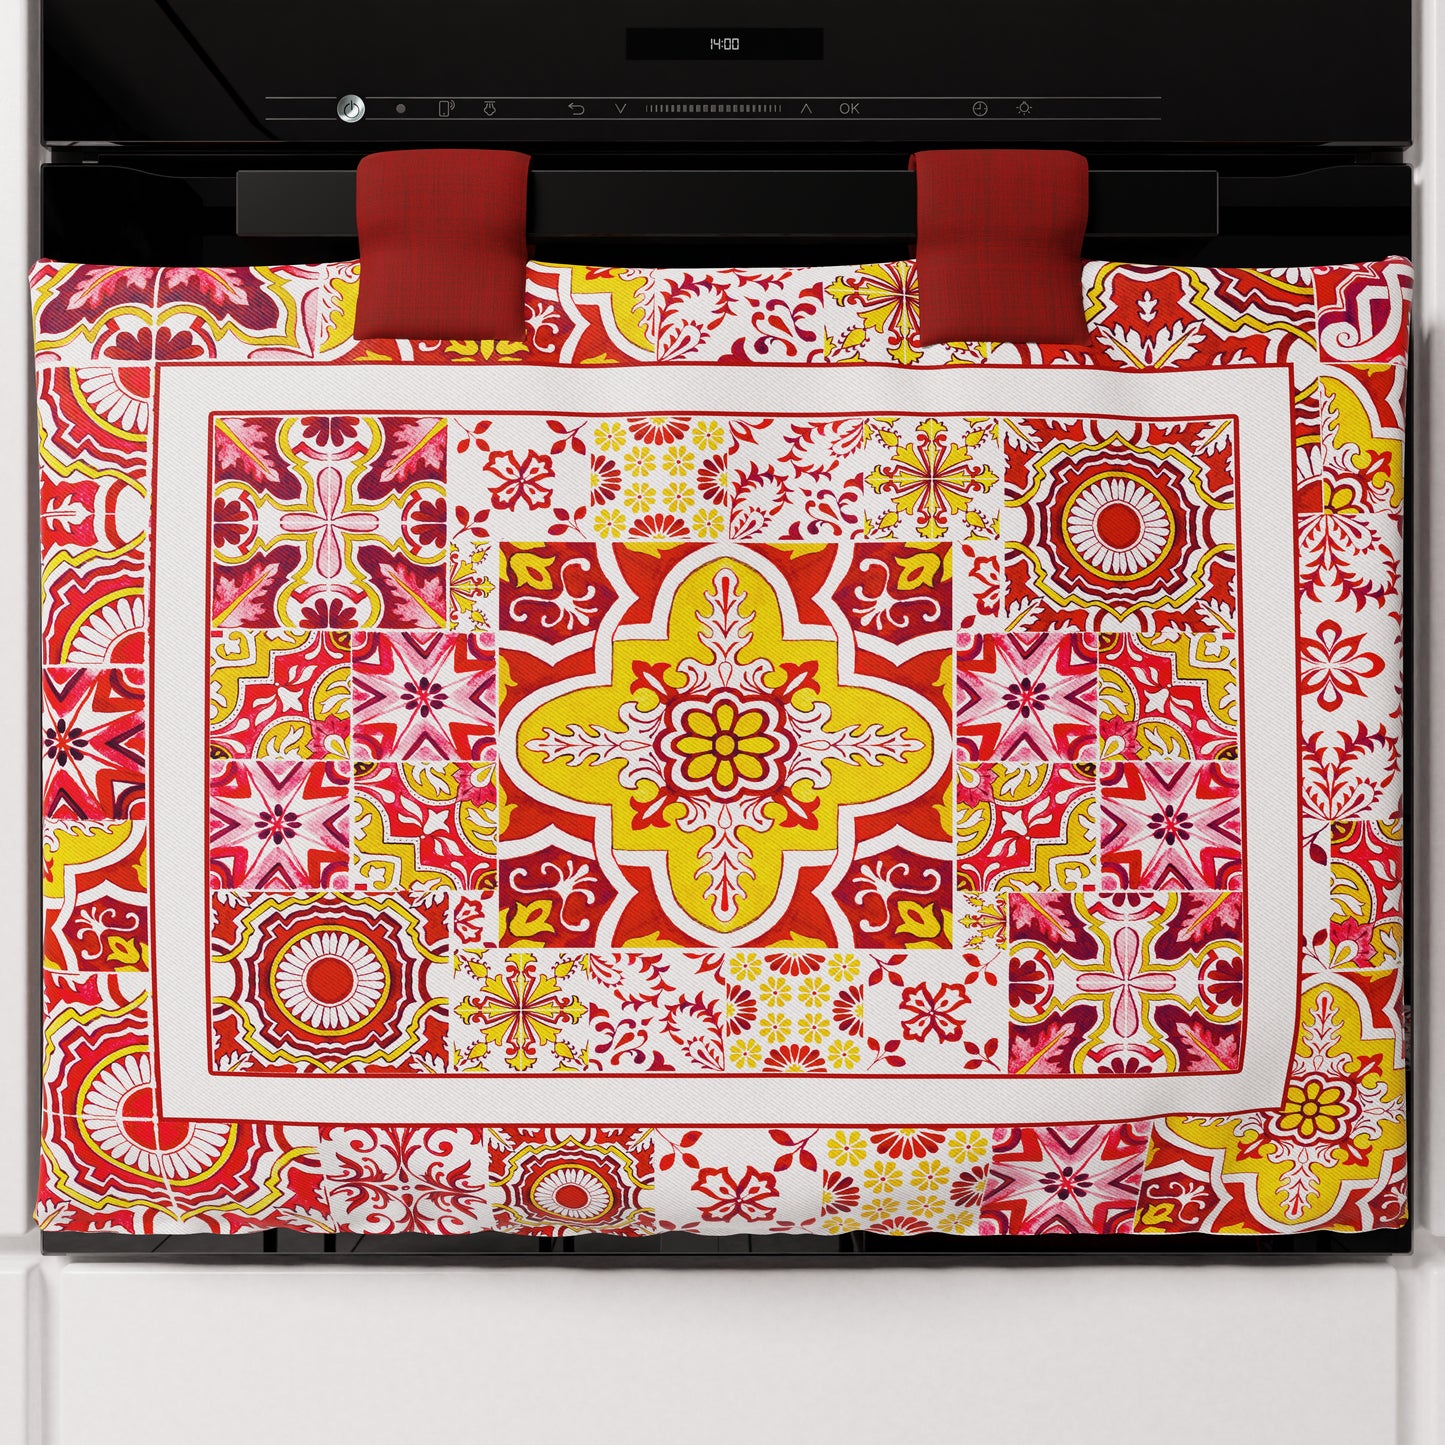 Geometric Oven Cover for Kitchen in Vietri Digital Printing 02 Red 1pc